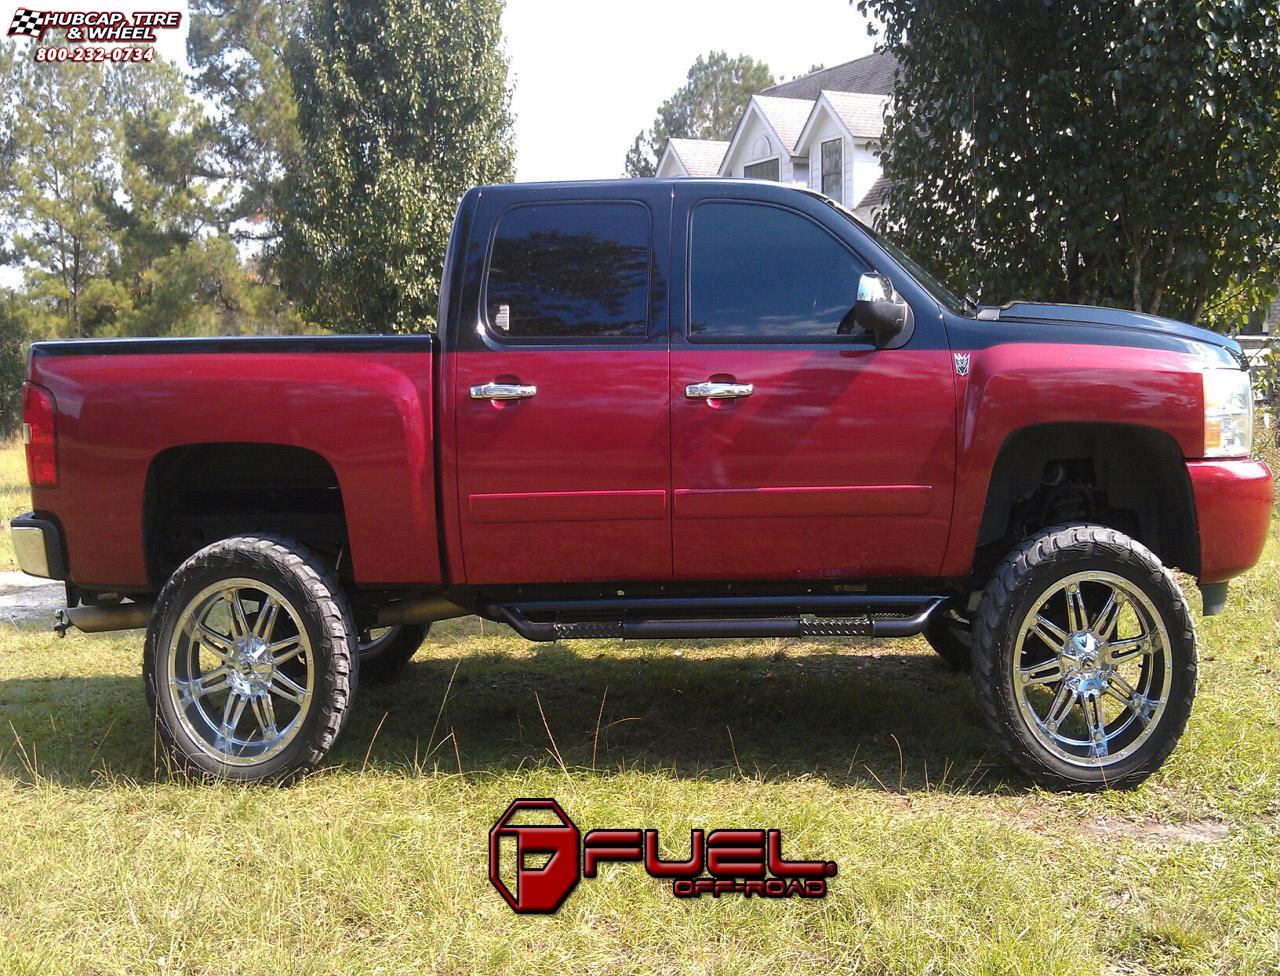 vehicle gallery/chevrolet silverado fuel hostage d530 24X11  Chrome wheels and rims